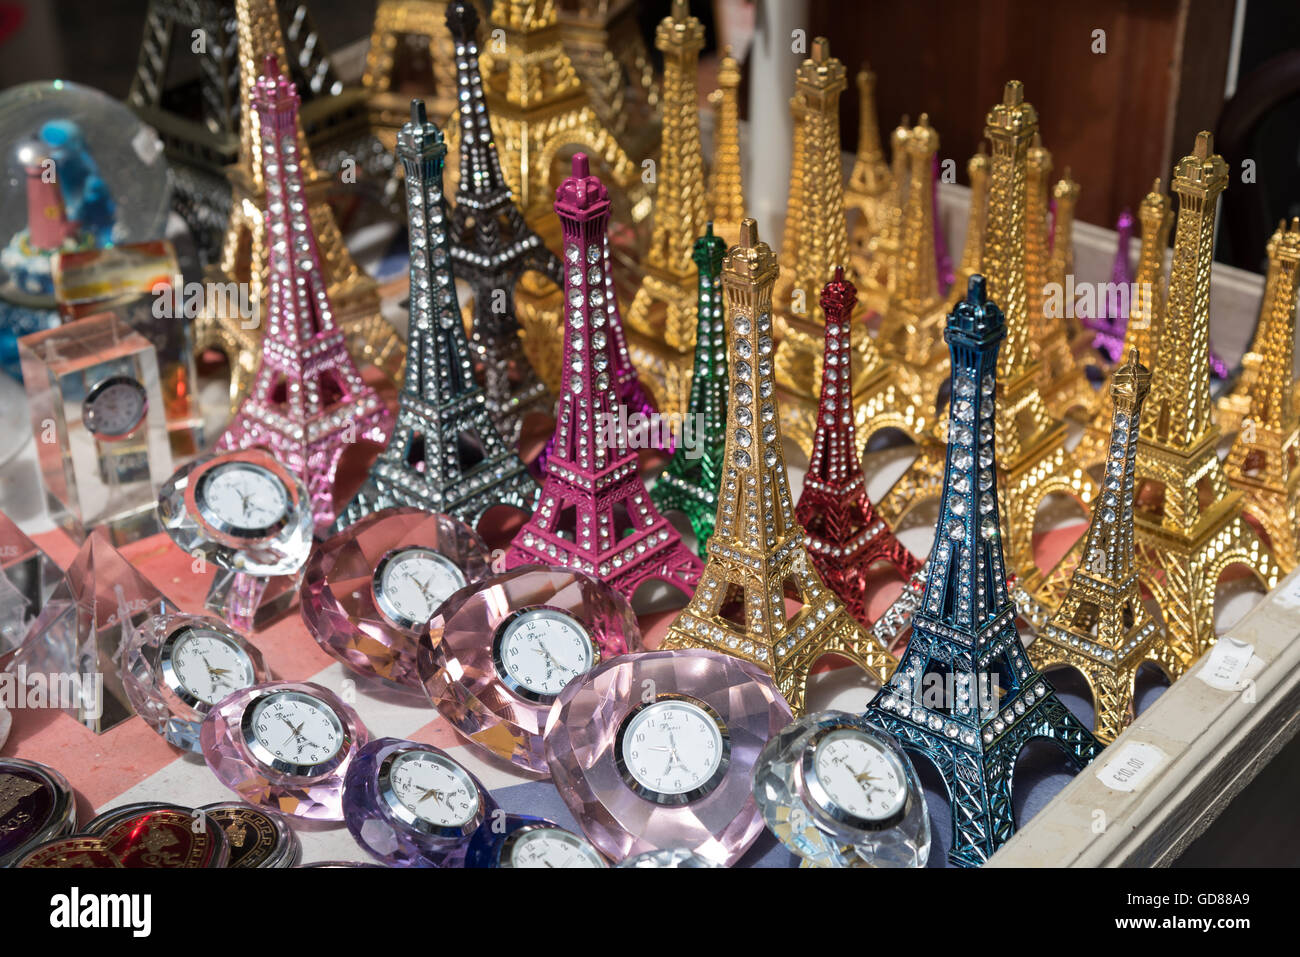 A selection of vibrant jeweled miniature Eiffel Tower souvenirs for sale in Boulogne-sur-Mer, France. Stock Photo